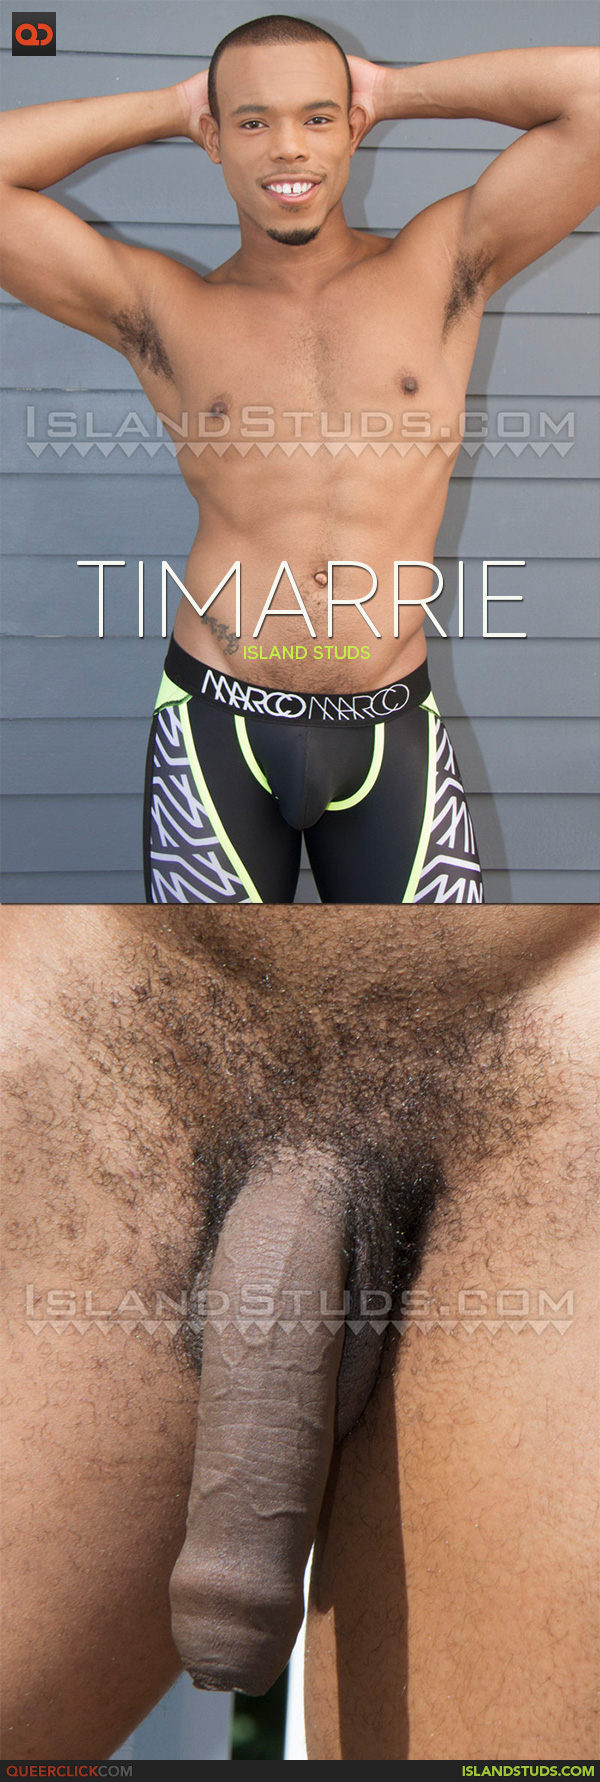 Island Studs: Timarrie